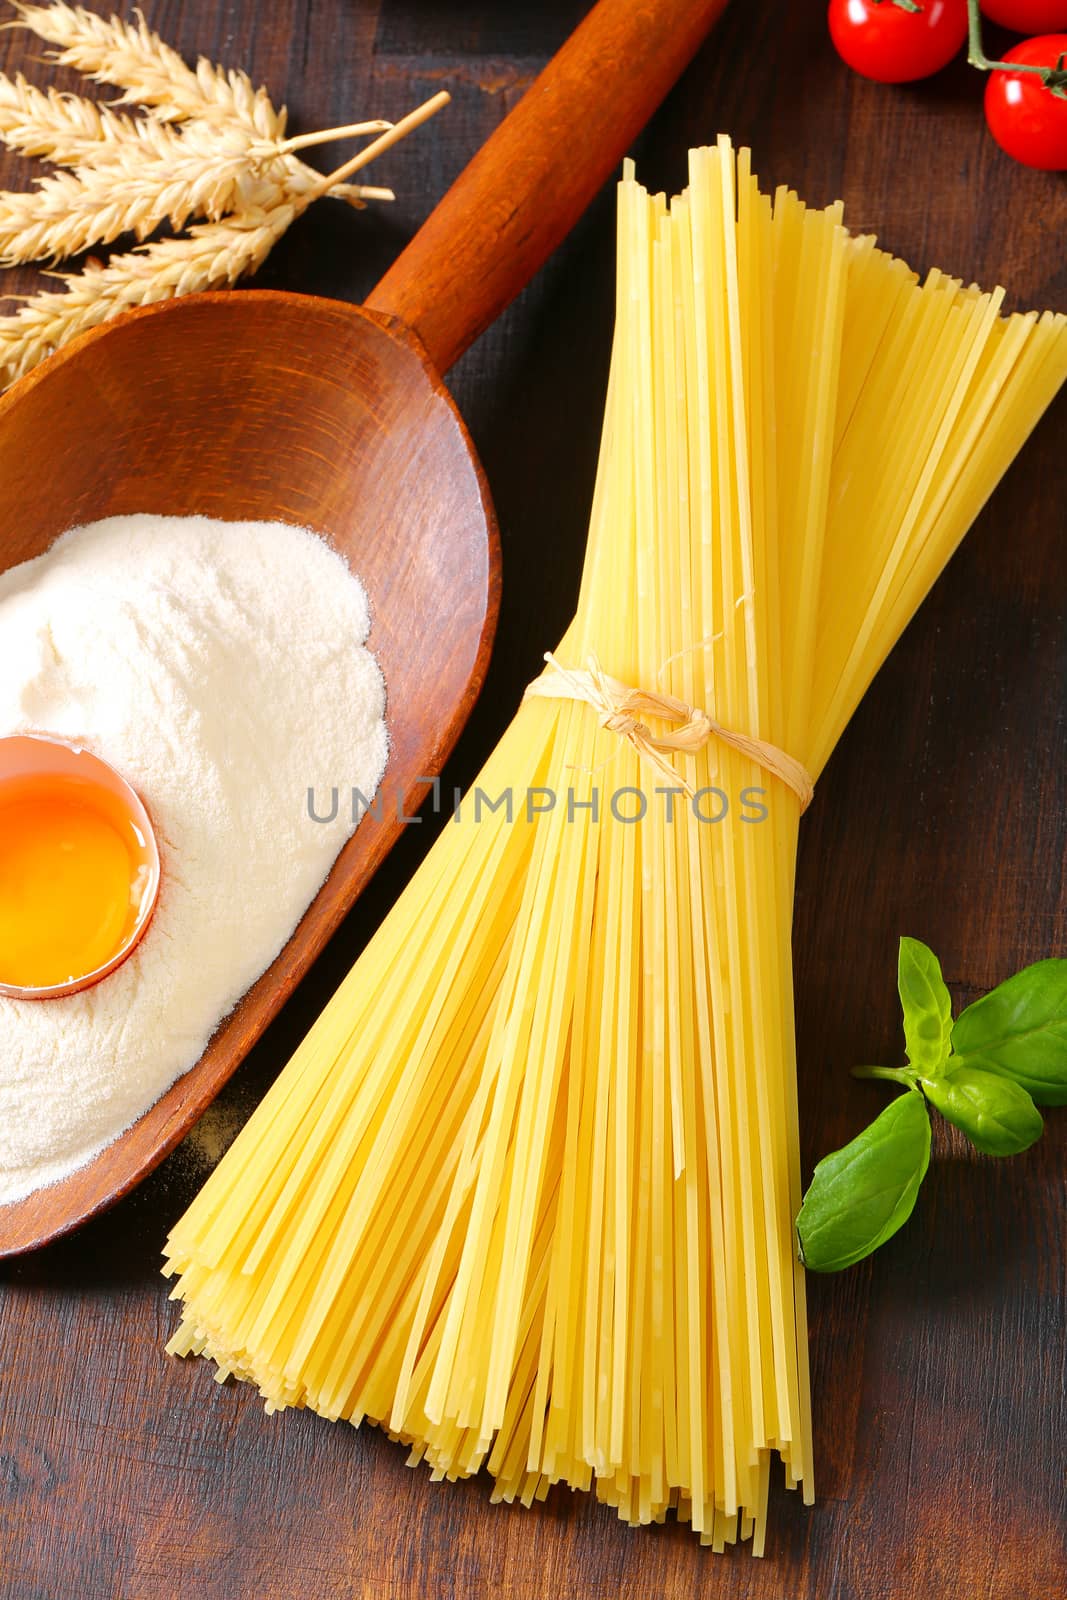 Bundle of dried spaghetti, scoop of flour and fresh egg